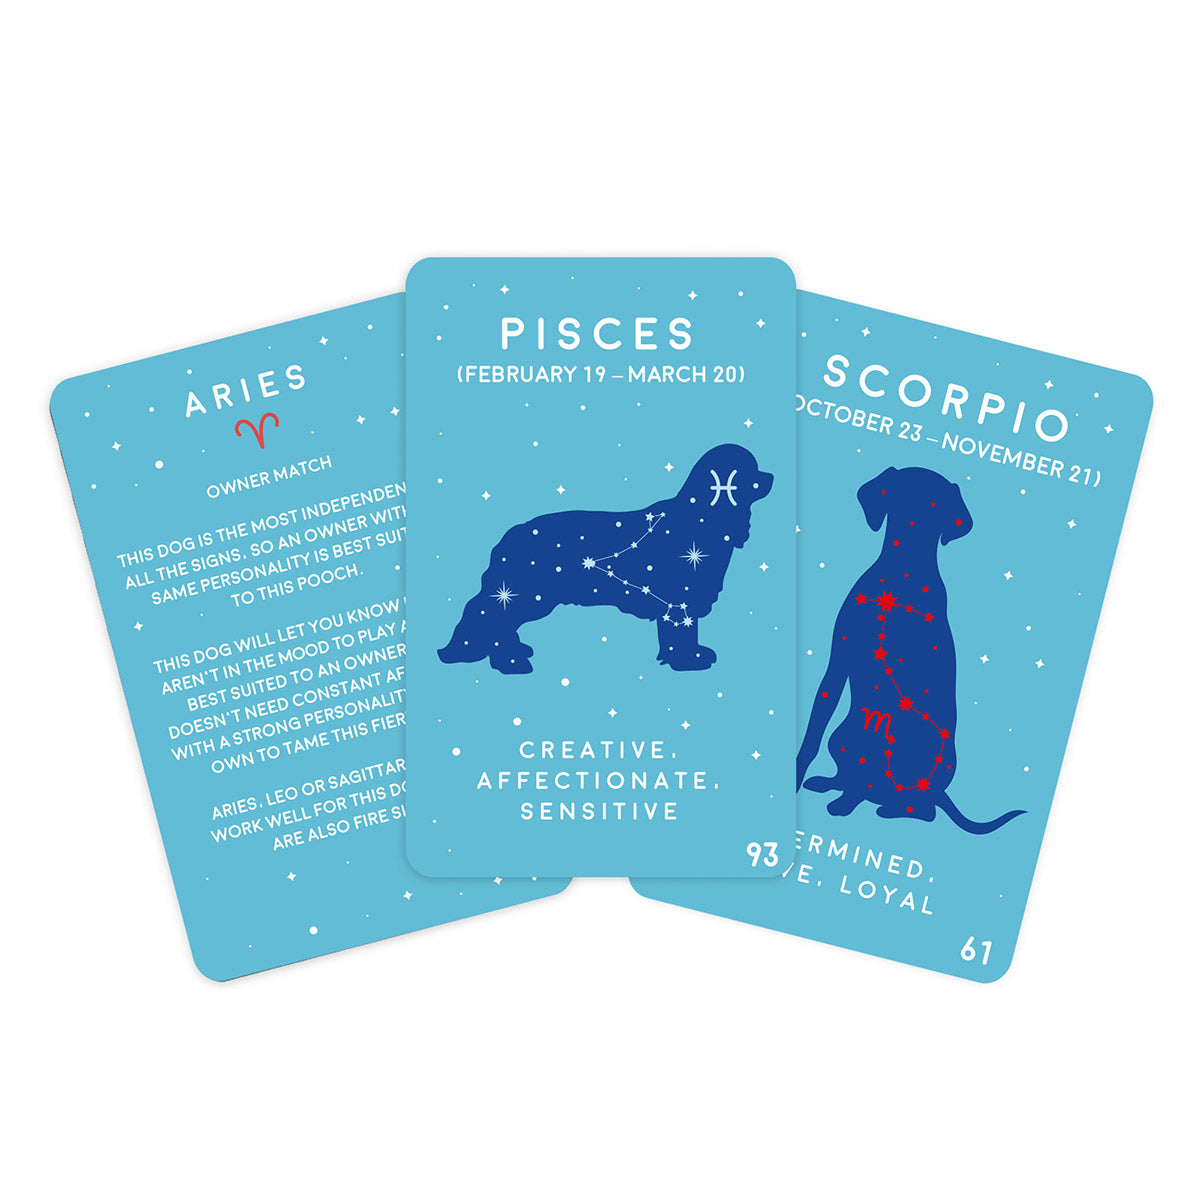 Paw-Mistry Cards Dog Edition - Gift Republic